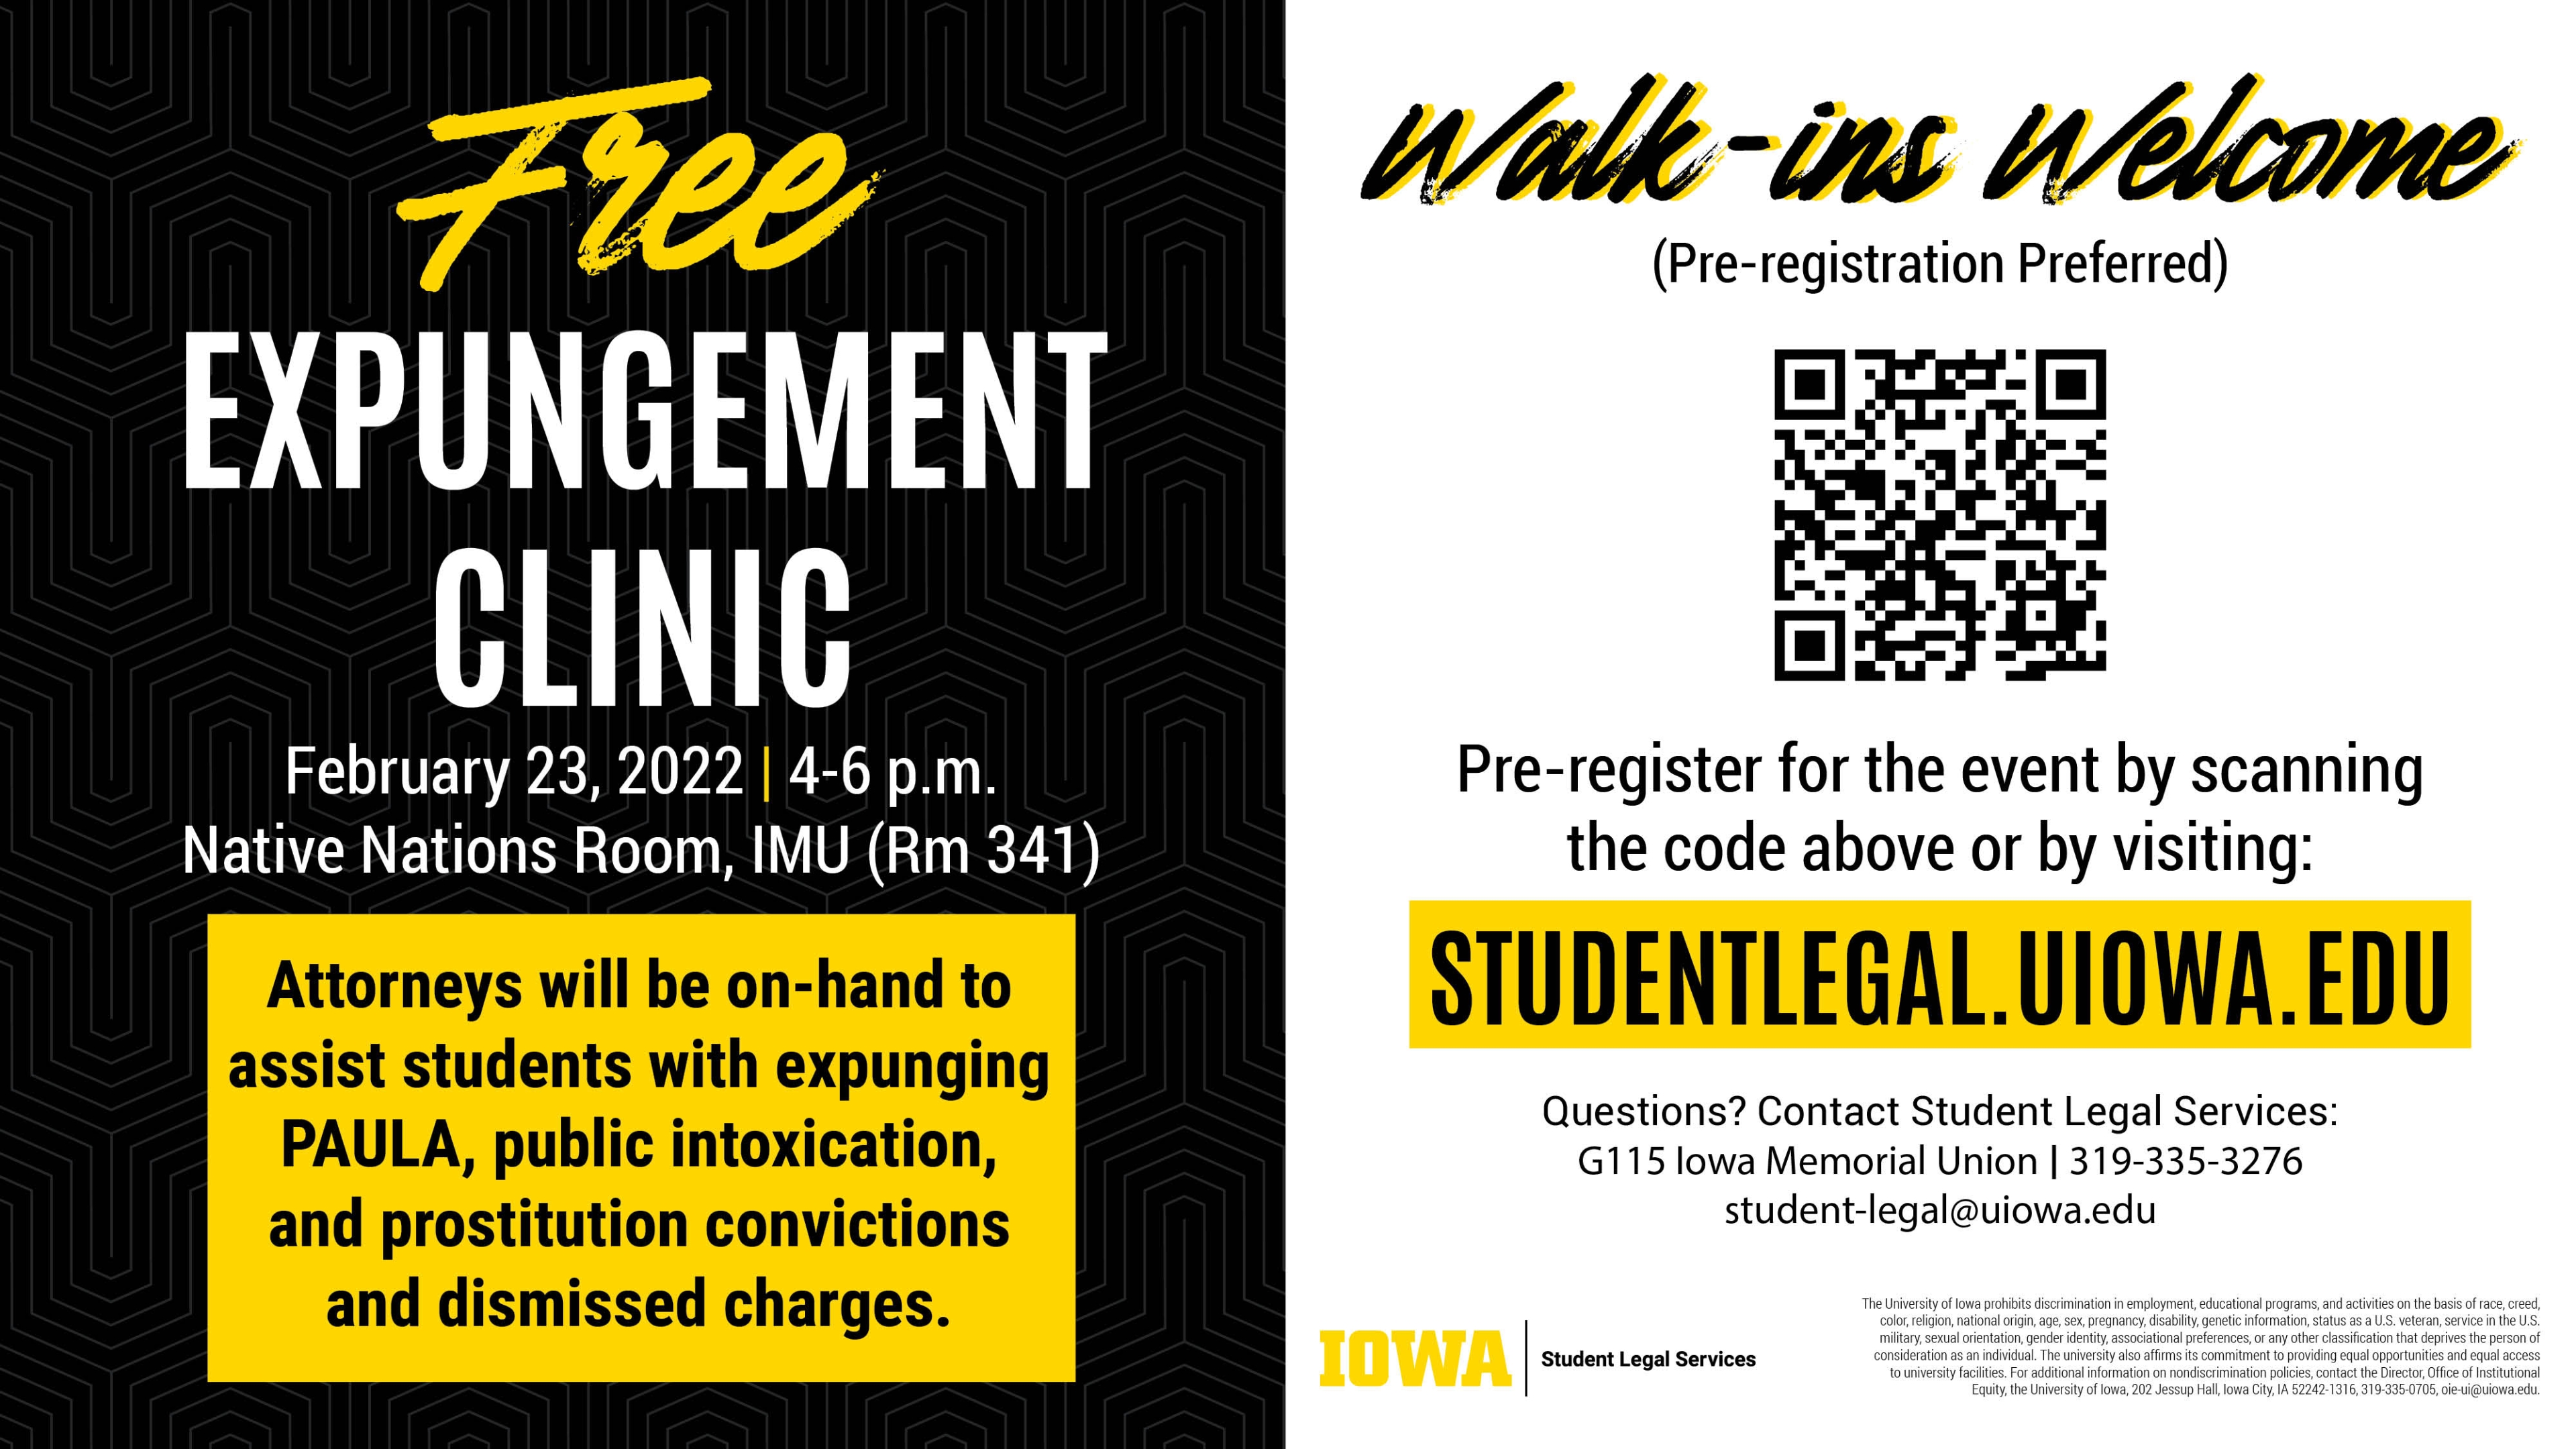 Free Expungement Clinic. February 23, 2022 | 4-6 p.m. Native Nations Room, IMU (Rm 341). Attorneys will be on-hand to assist students with expunging PAULA, public intoxication and prostitution convictions and dismissed charges. Walk-ins Welcome. Pre-registration preferred. Pre-register for the event by scanning the code above or visiting studentlegal.uiowa.edu. 